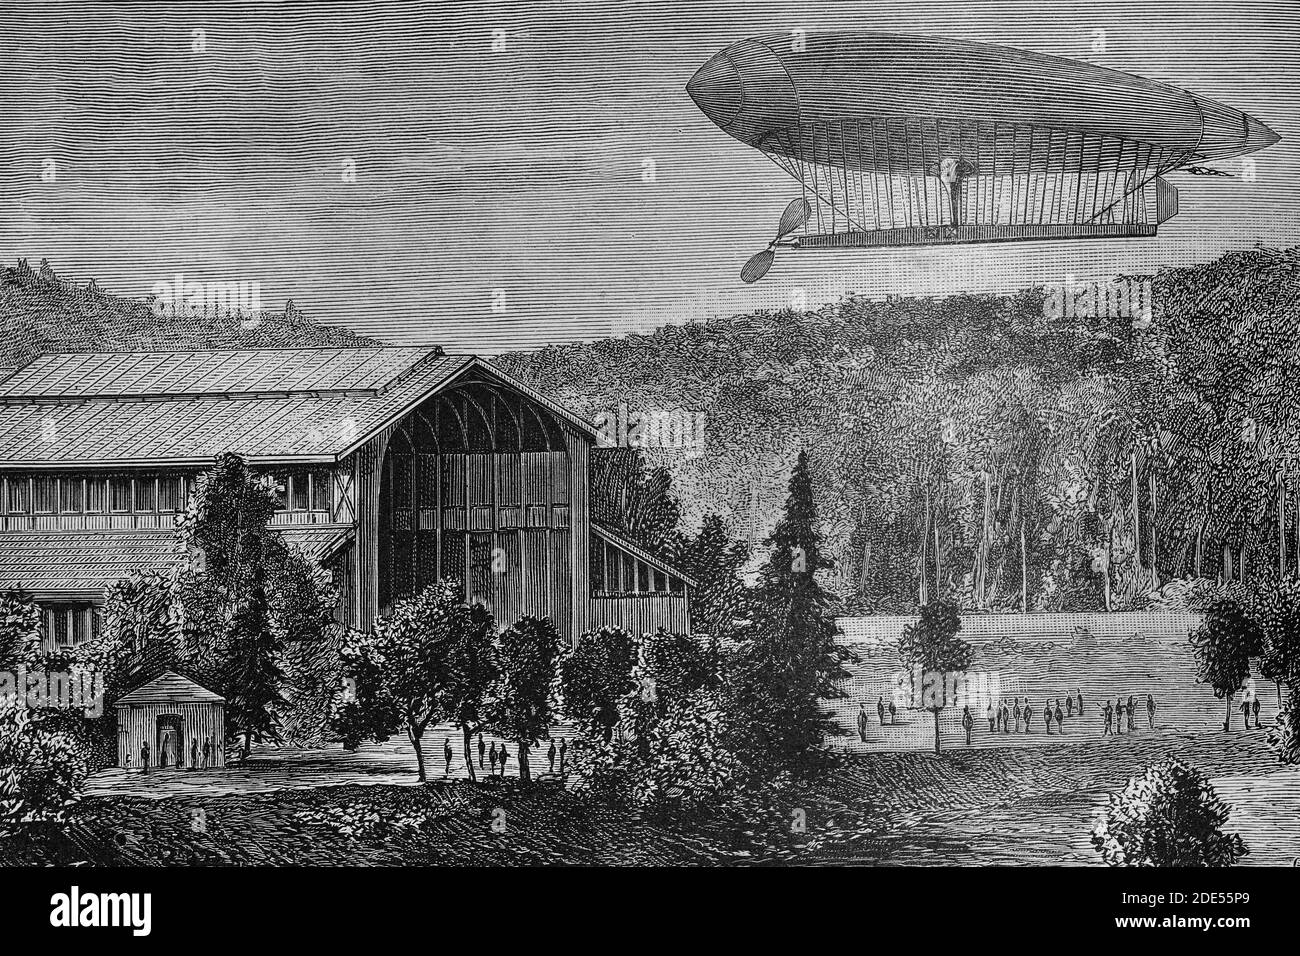 Electric airship balloon by Renard and Krebs, French inventors, tested over Meudon, France on August 9th, 1884. Antique illustration. 1884. Stock Photo